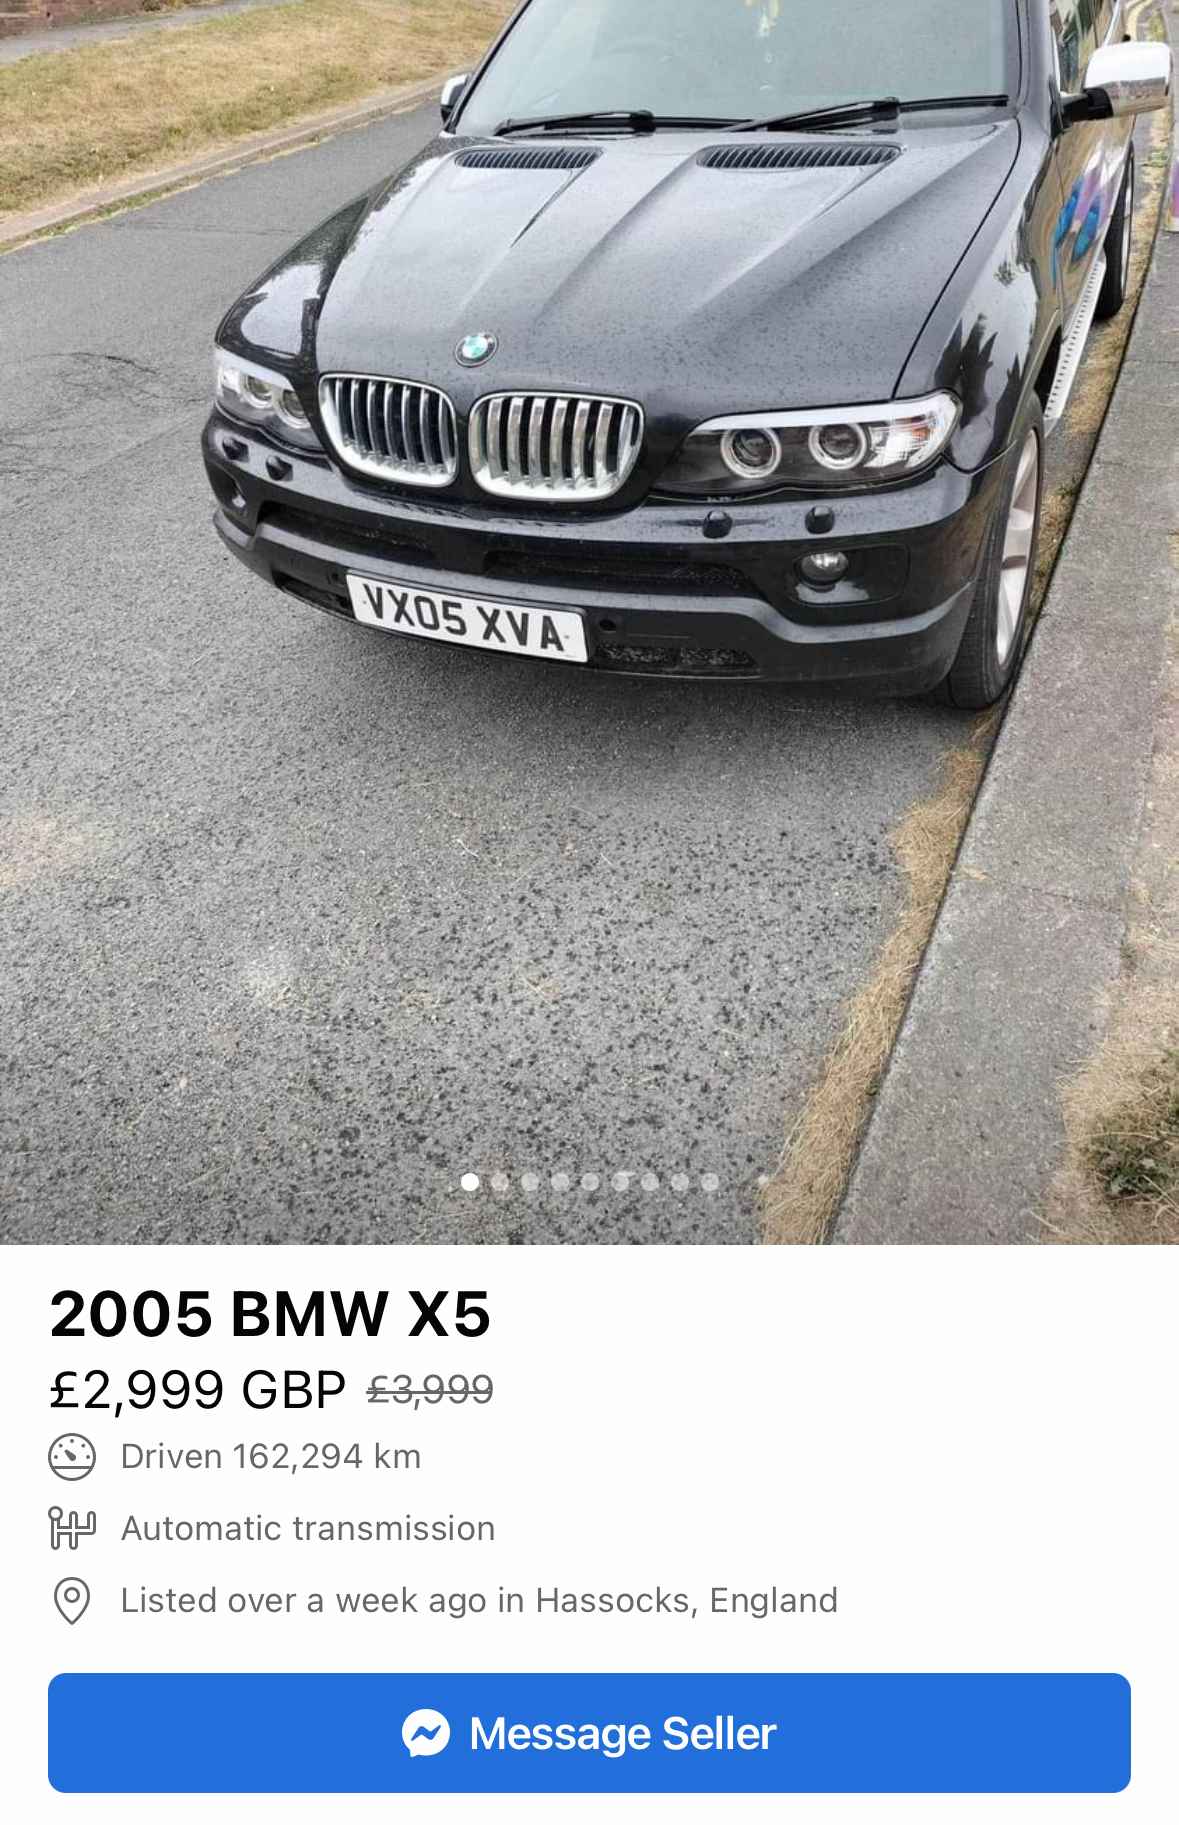 Photograph of VX05 XVA - a Black BMW X5 parked in Hollingdean by a non-resident and stored here whilst a dodgy car dealer attempts to sell it. The fifth of five photographs supplied by the residents of Hollingdean.